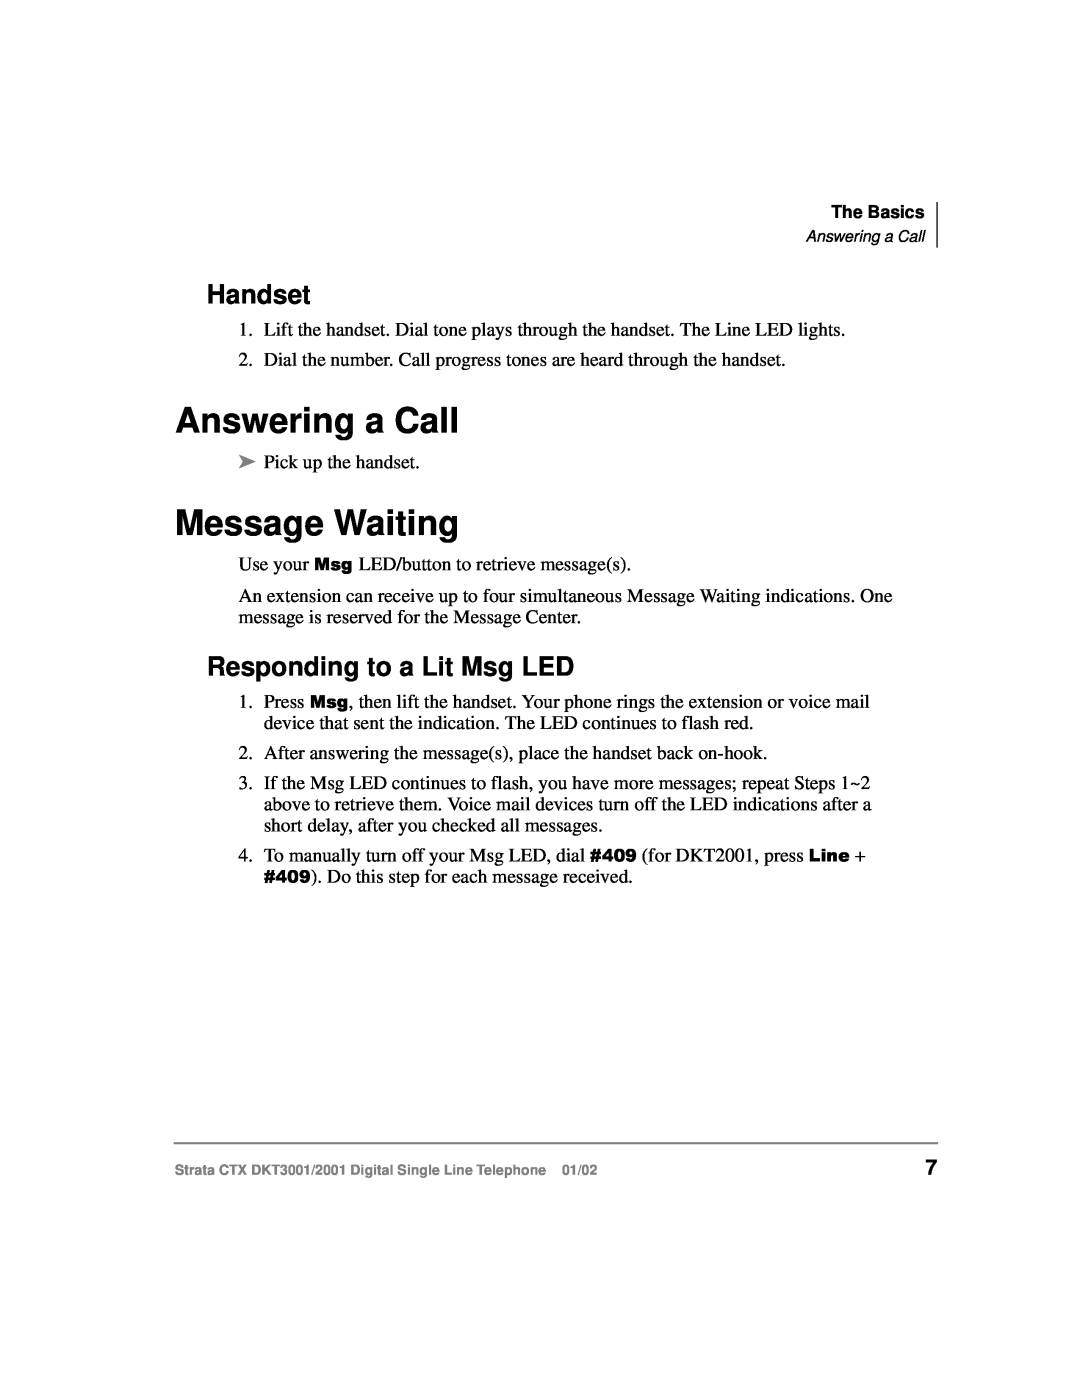 Toshiba 2001, DXT3001 manual Answering a Call, Message Waiting, Handset, Responding to a Lit Msg LED 